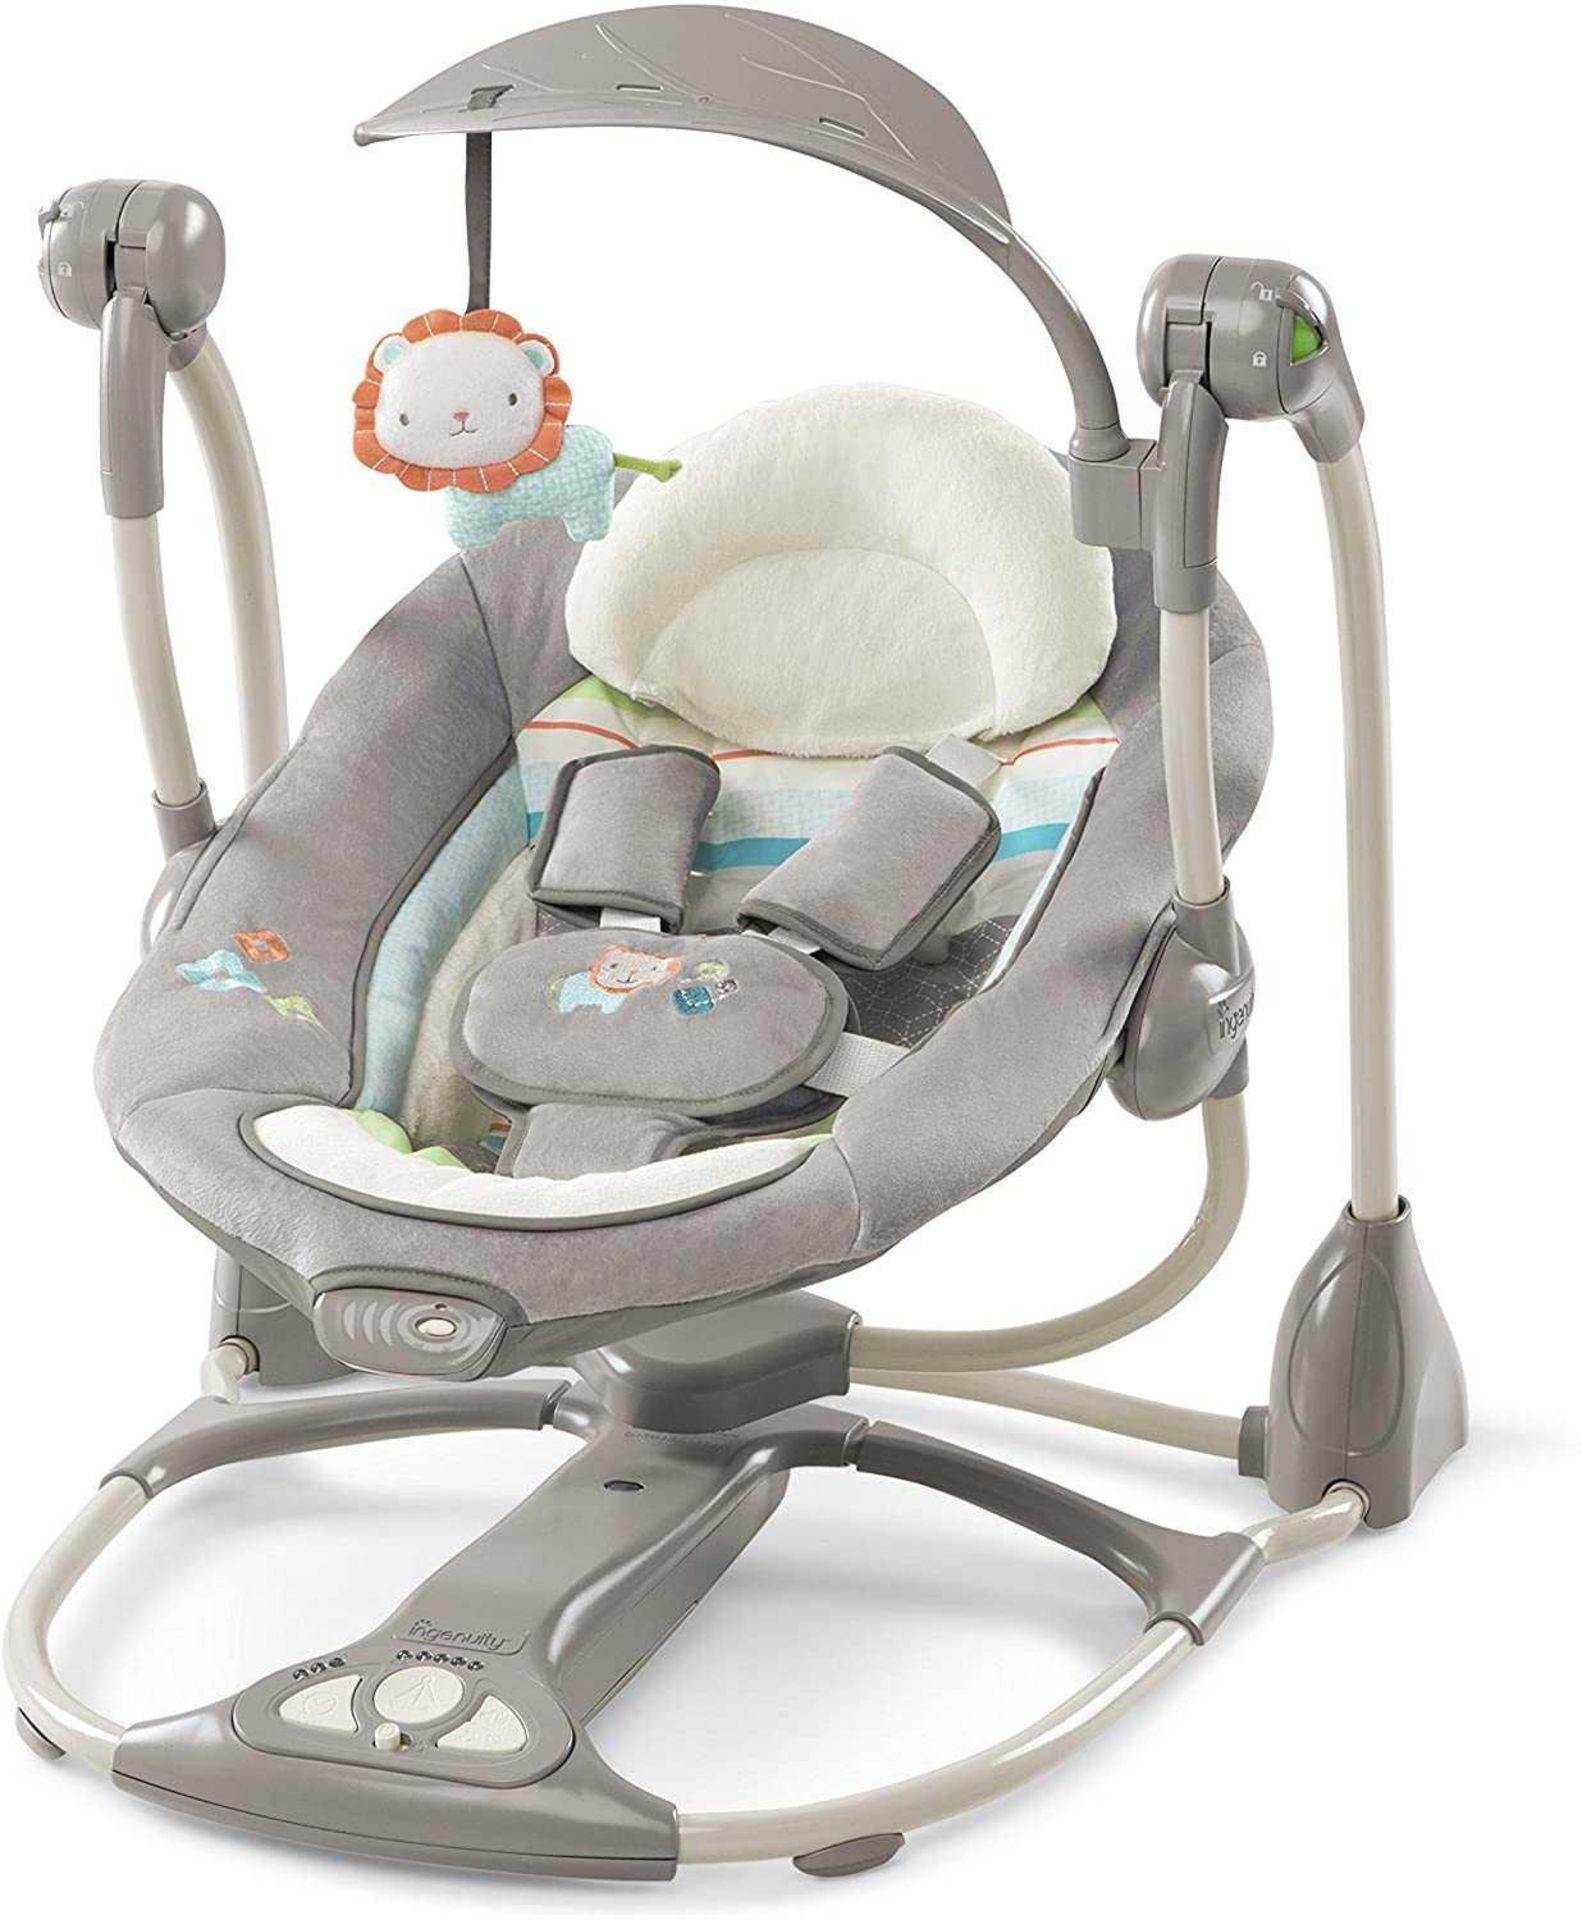 Rrp £100 Boxed Ingenuity Convert Me Swing To Seat Baby Bouncer